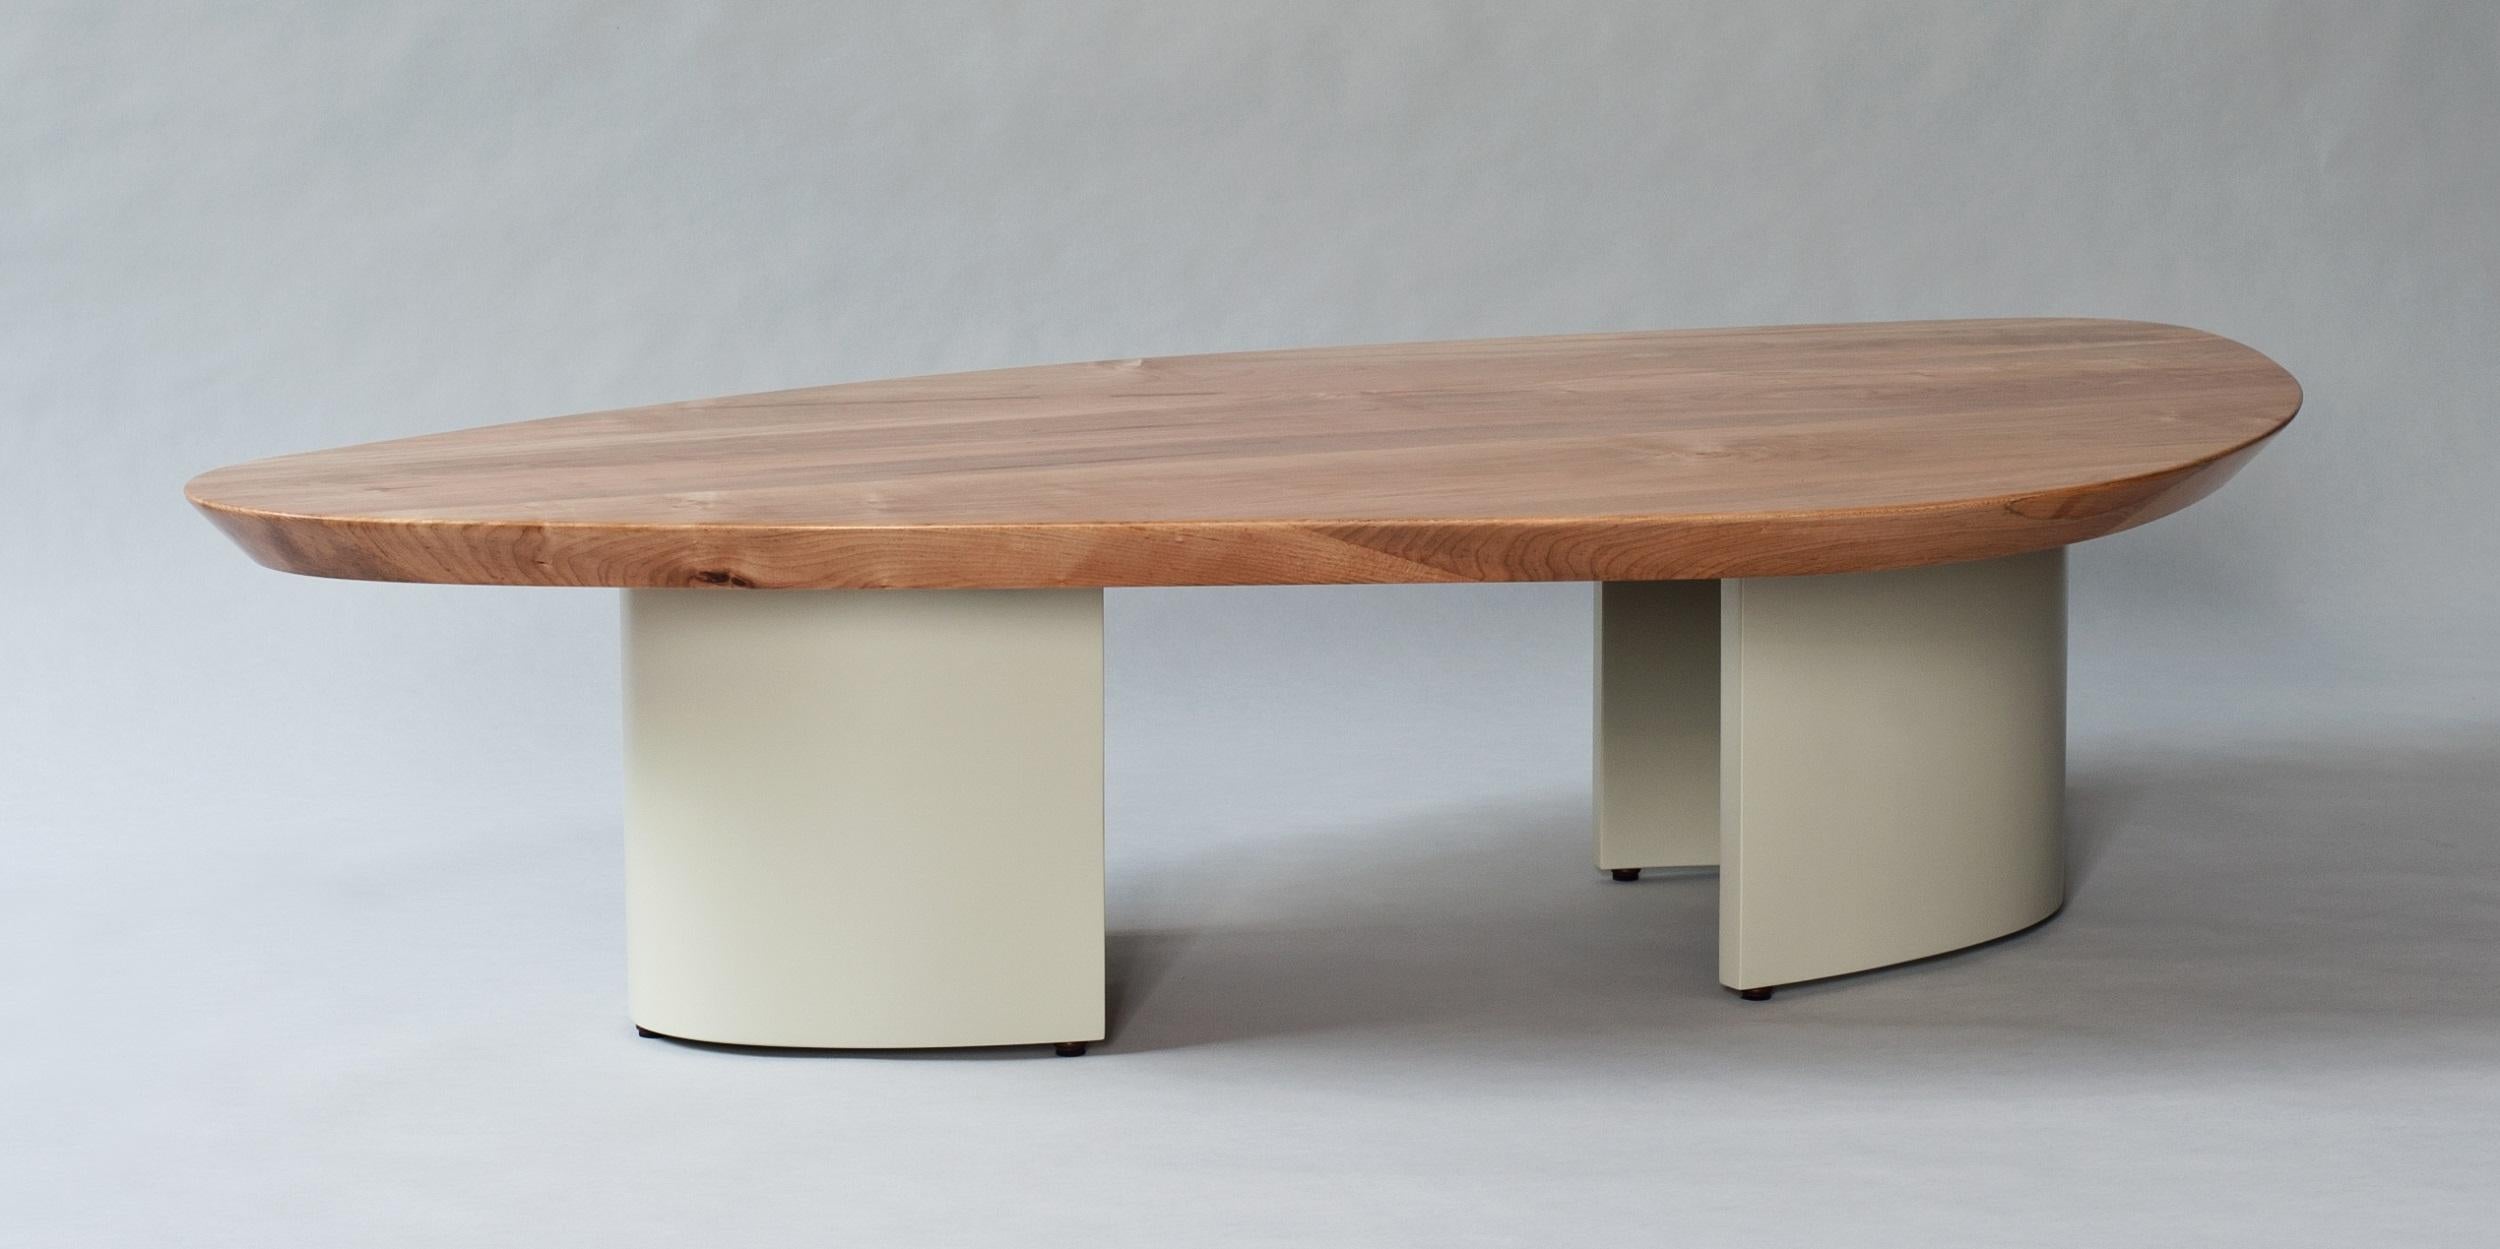 Indian Ledge Coffee Table by DeMuro Das in Solid Maple with Pebble Grey Lacquered Base